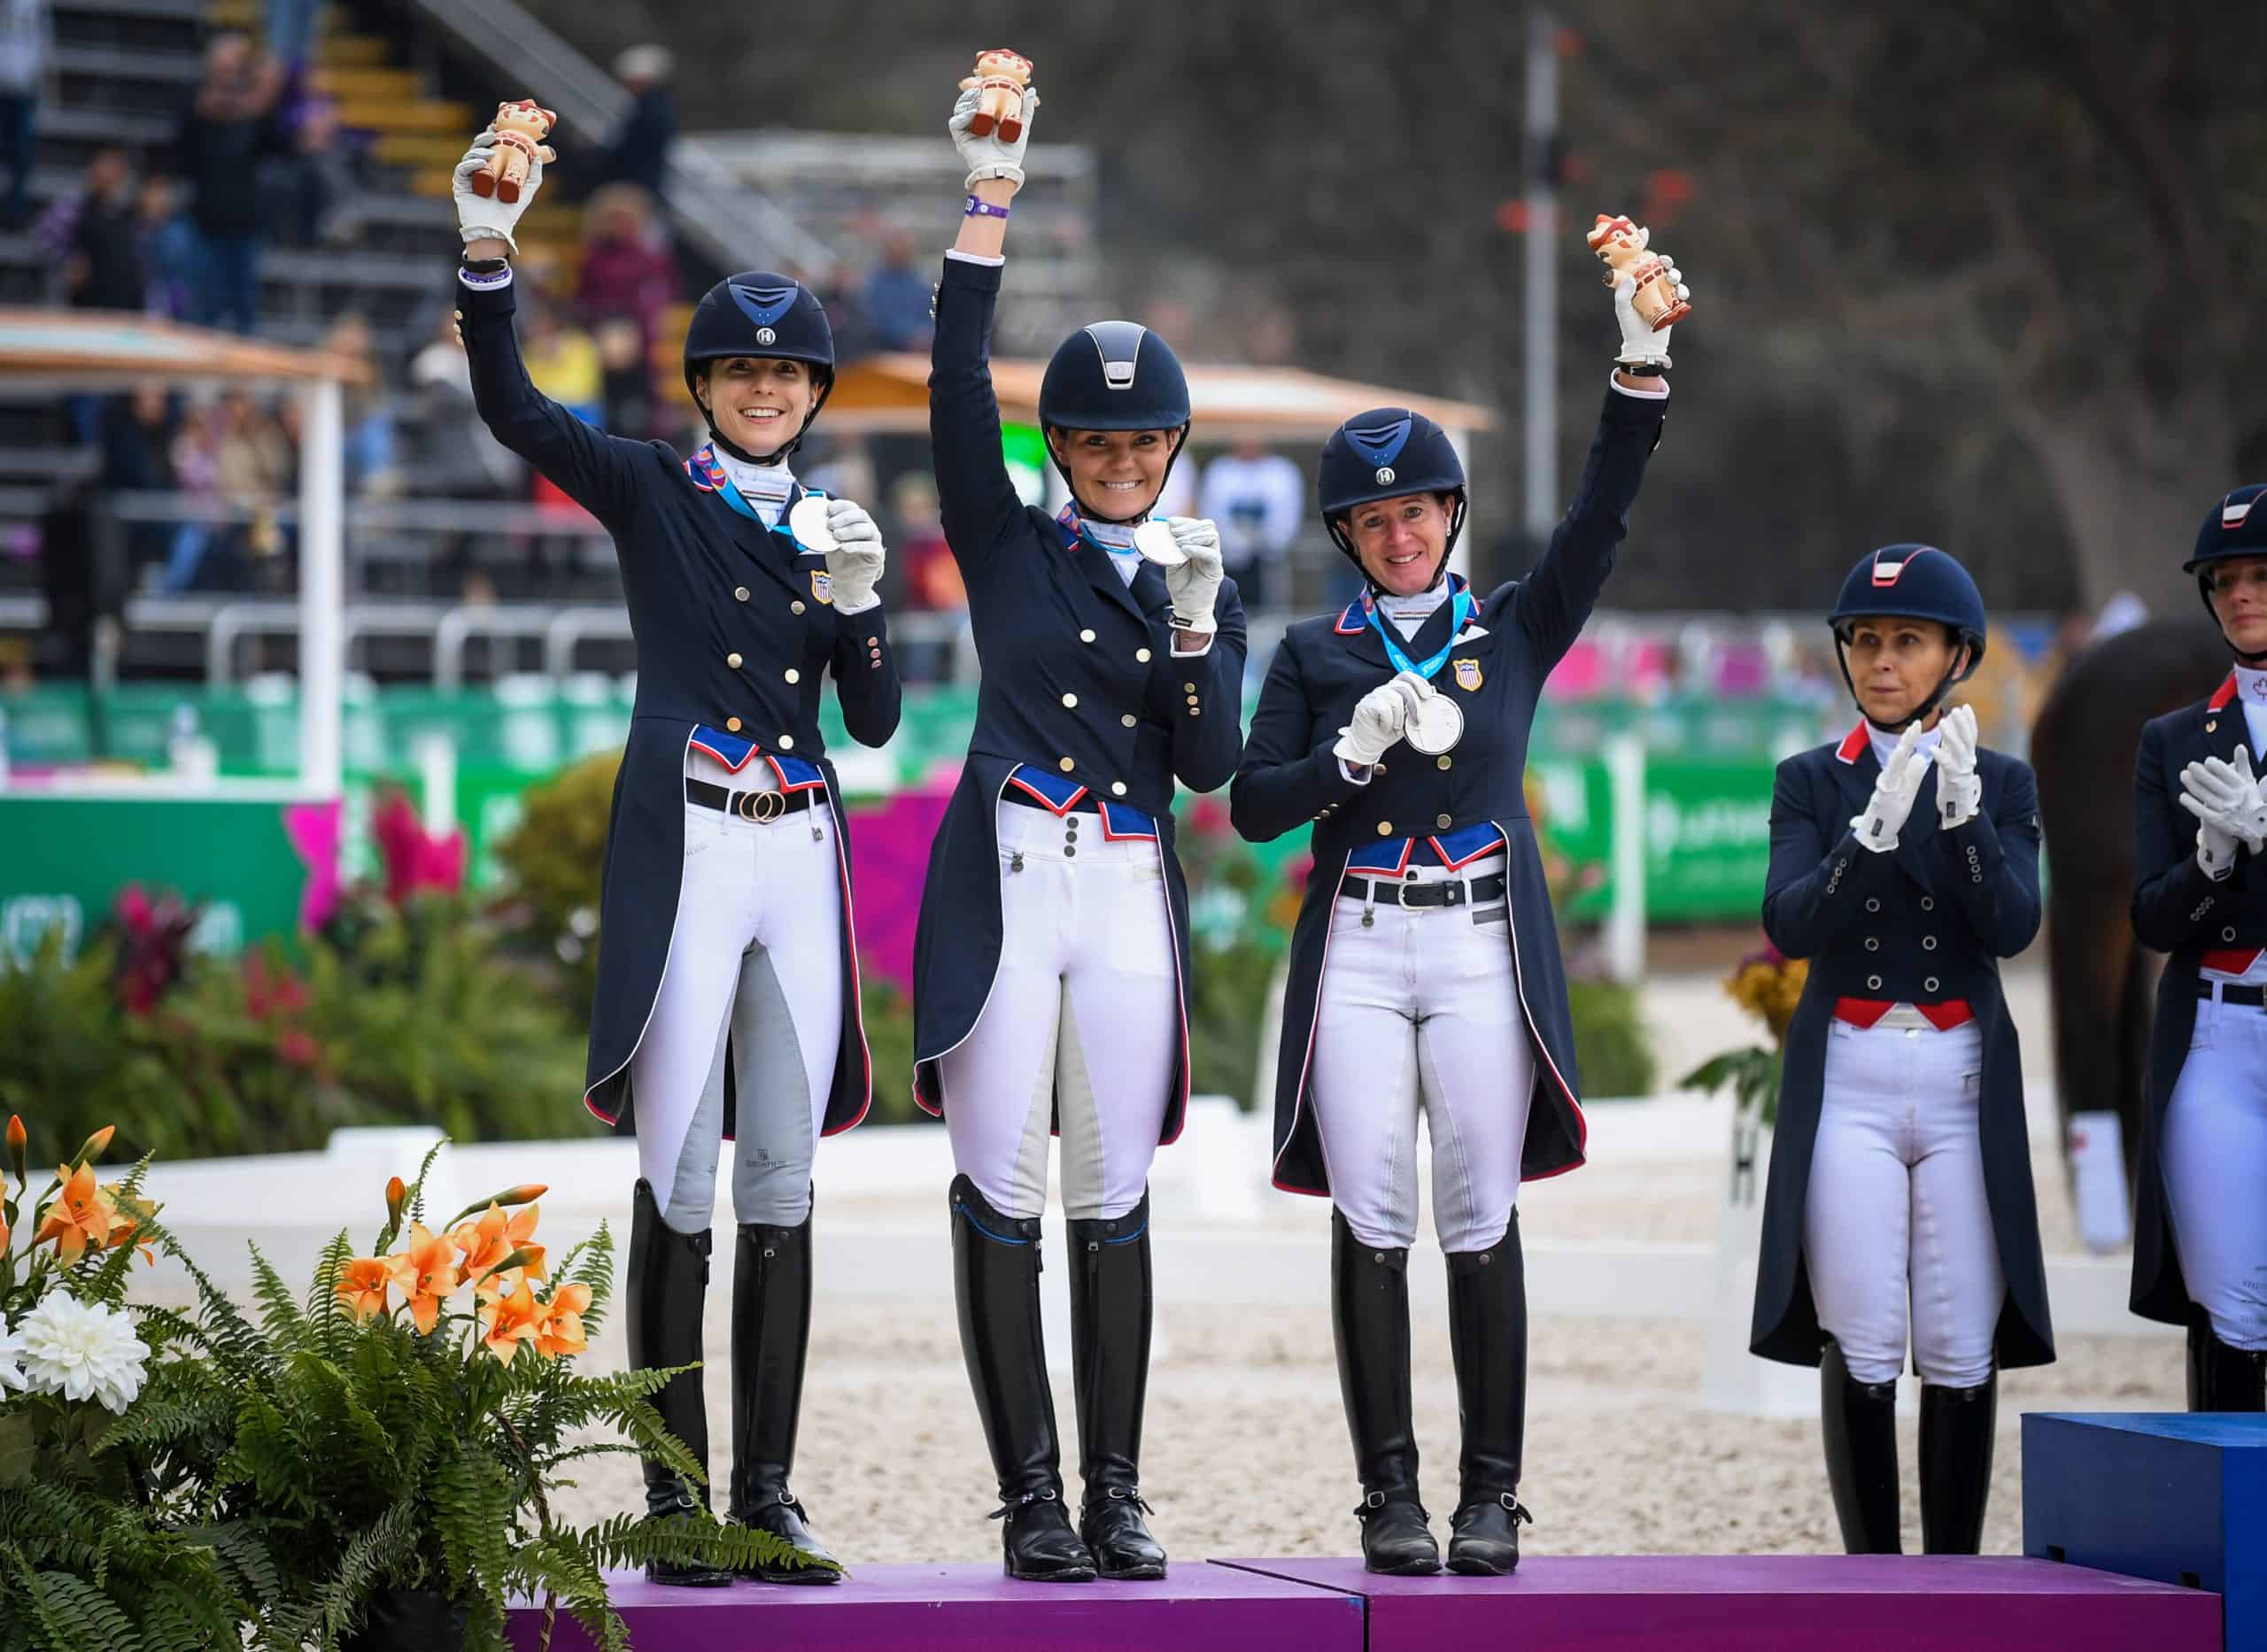 Join U.S. Equestrian Teams on the Podium at 2019 Pan American Games